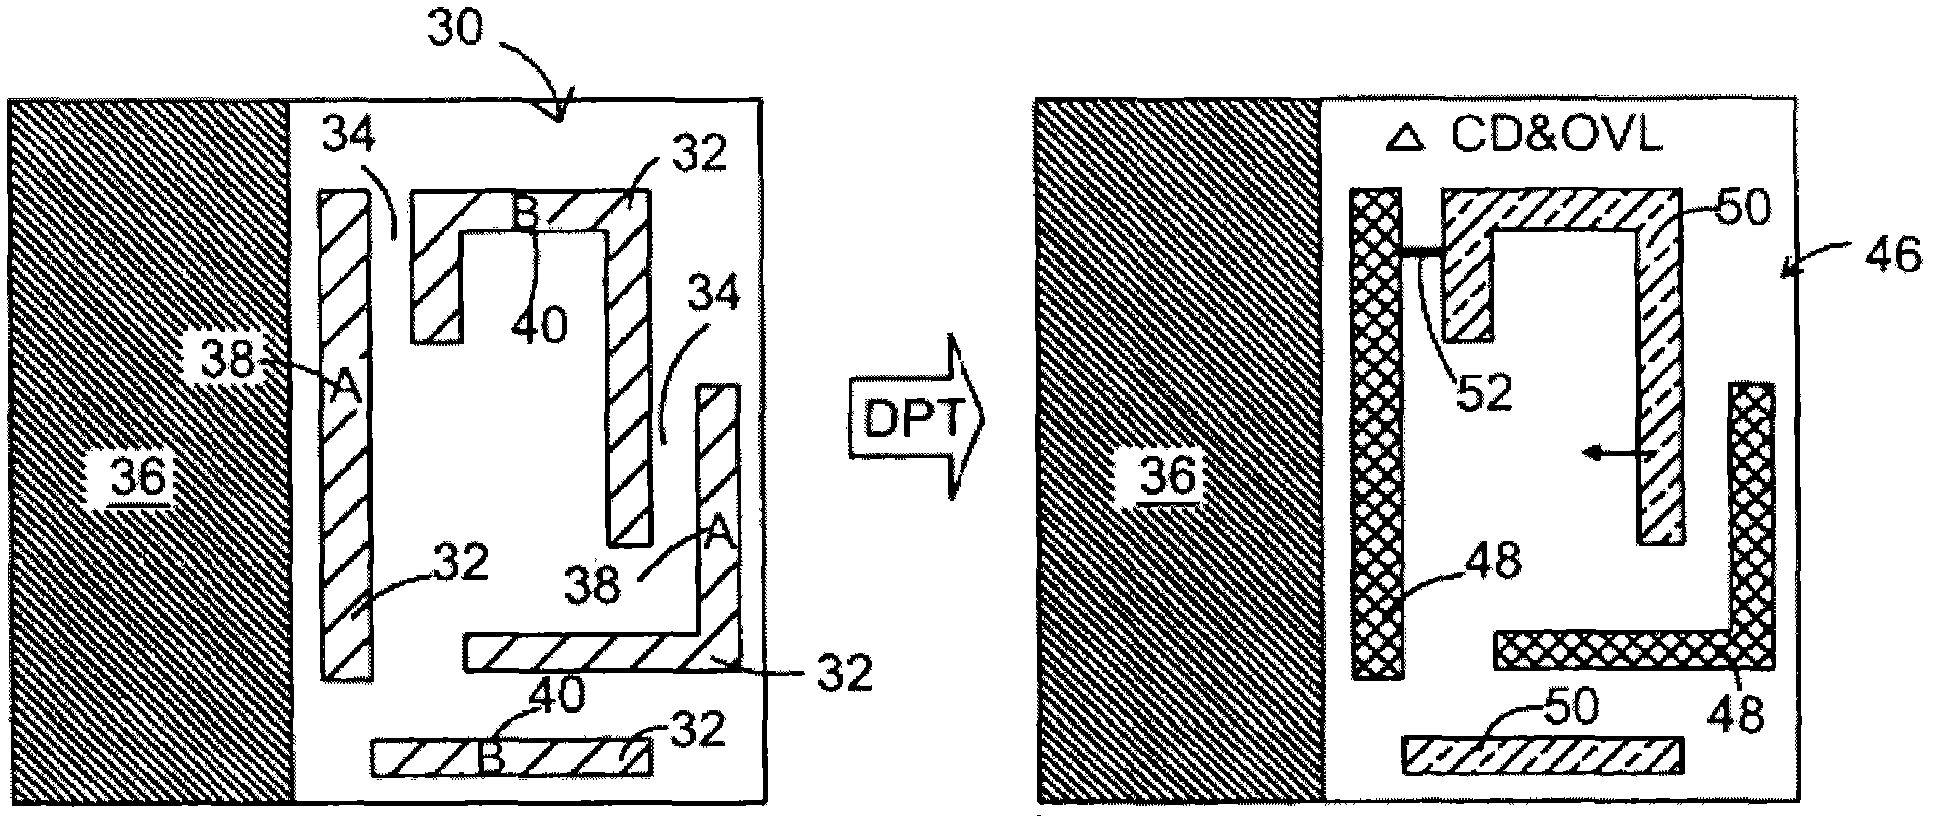 Decomposition and marking of semiconductor device design layout in double patterning lithography